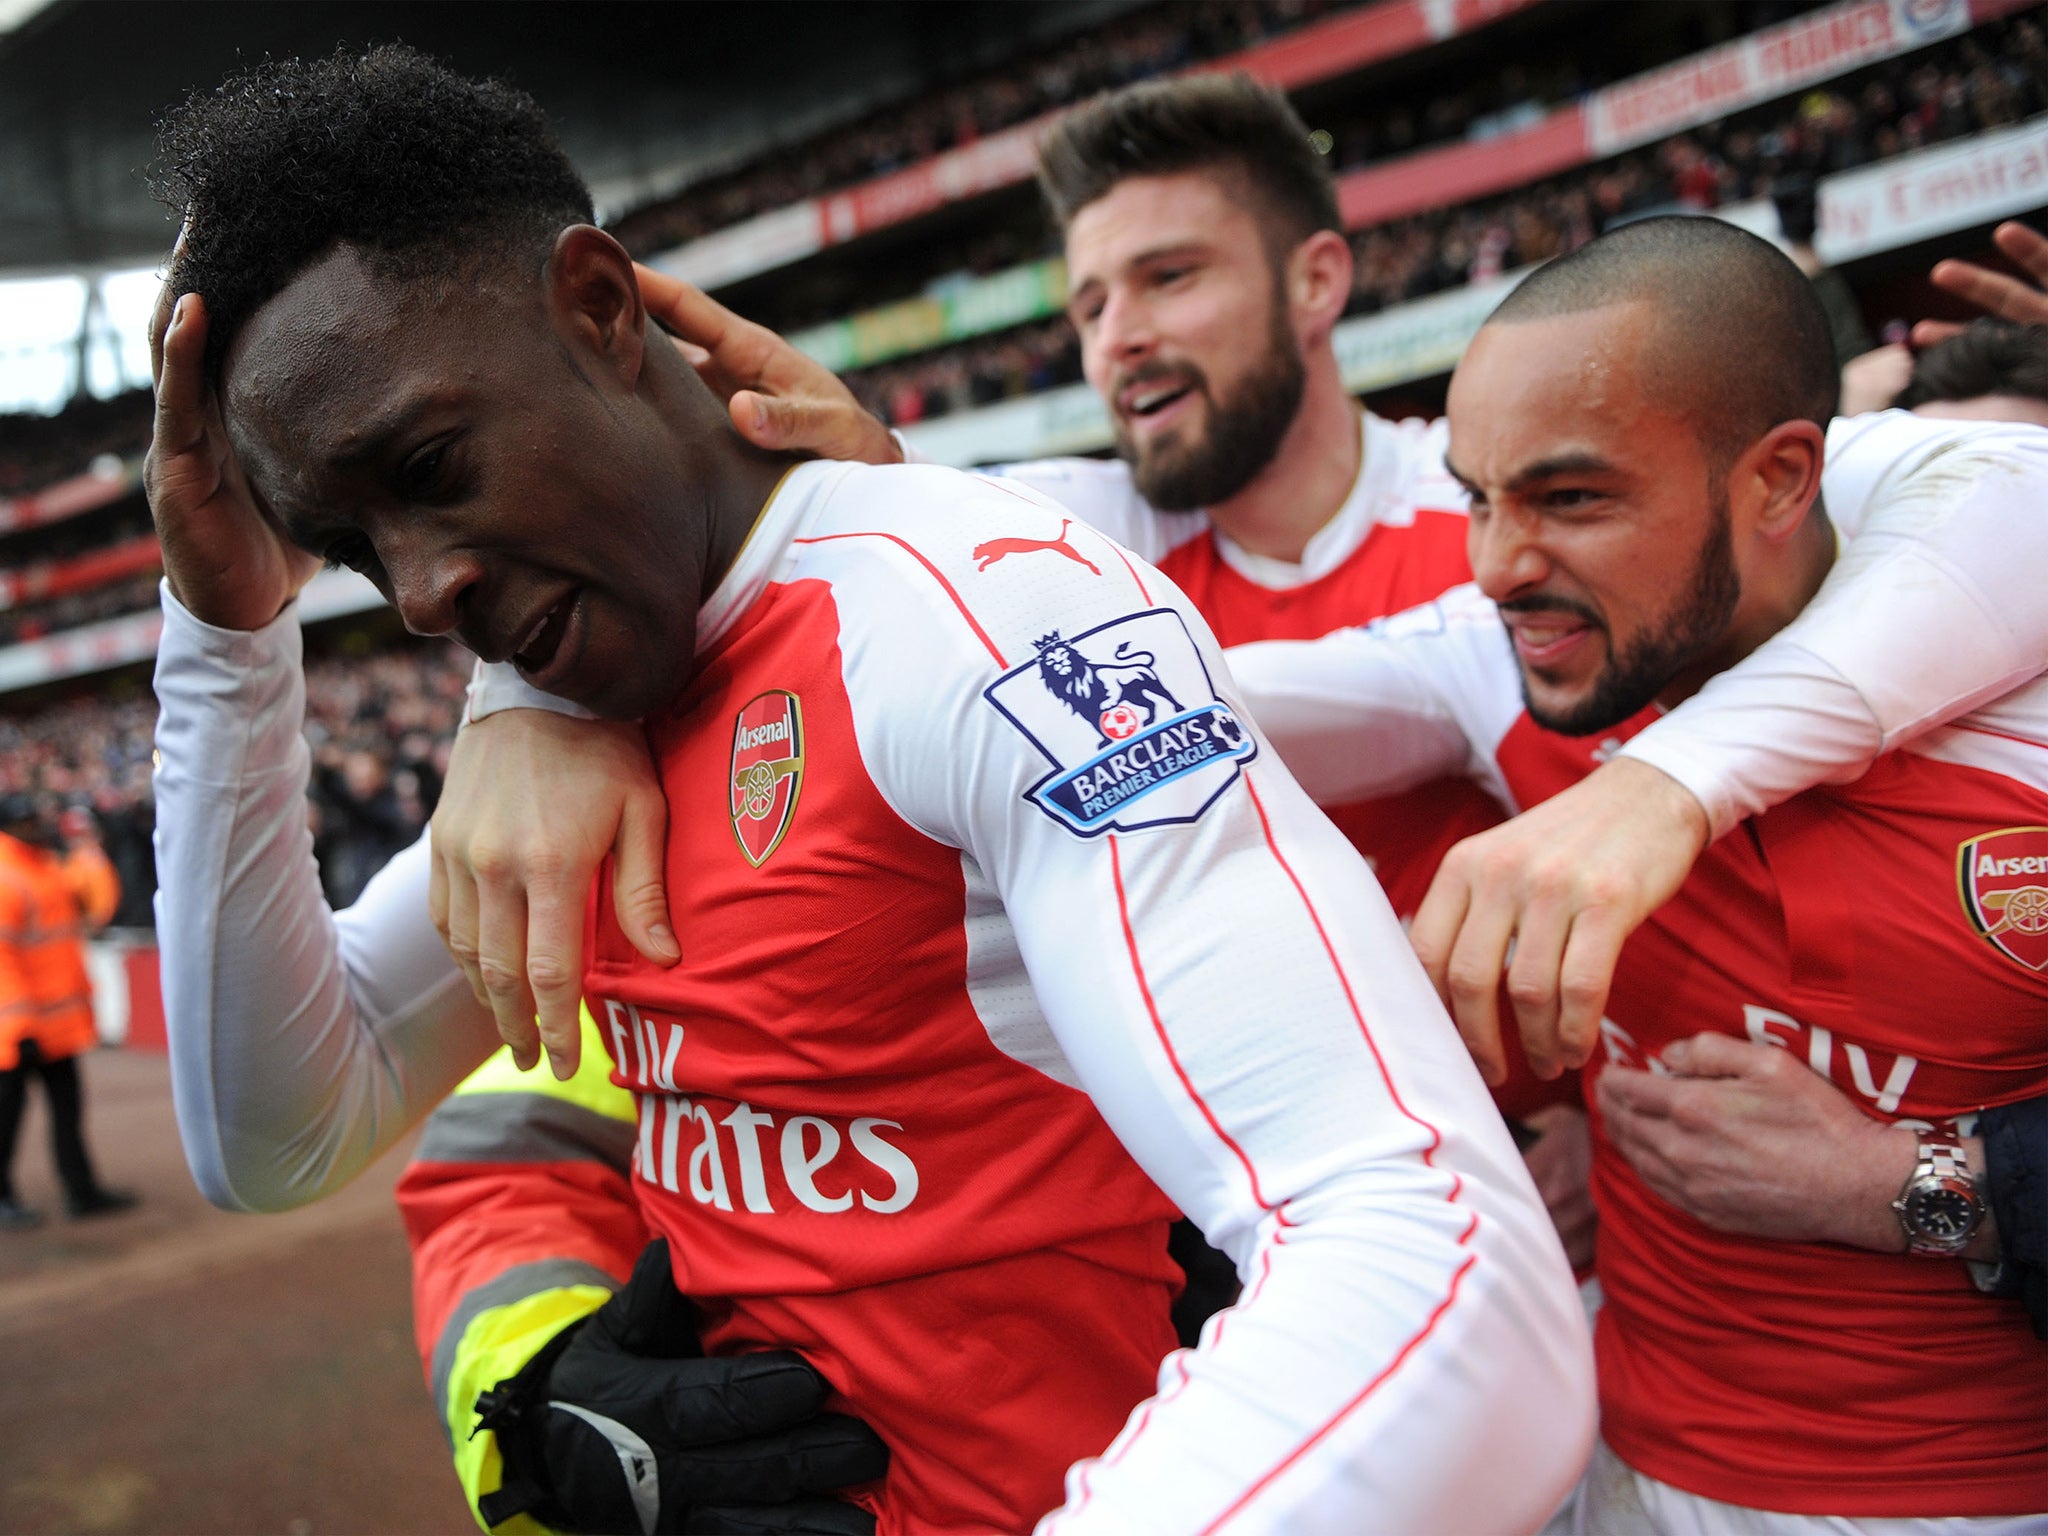 Arsenal striker Danny Welbeck is congratulated on his winning goal